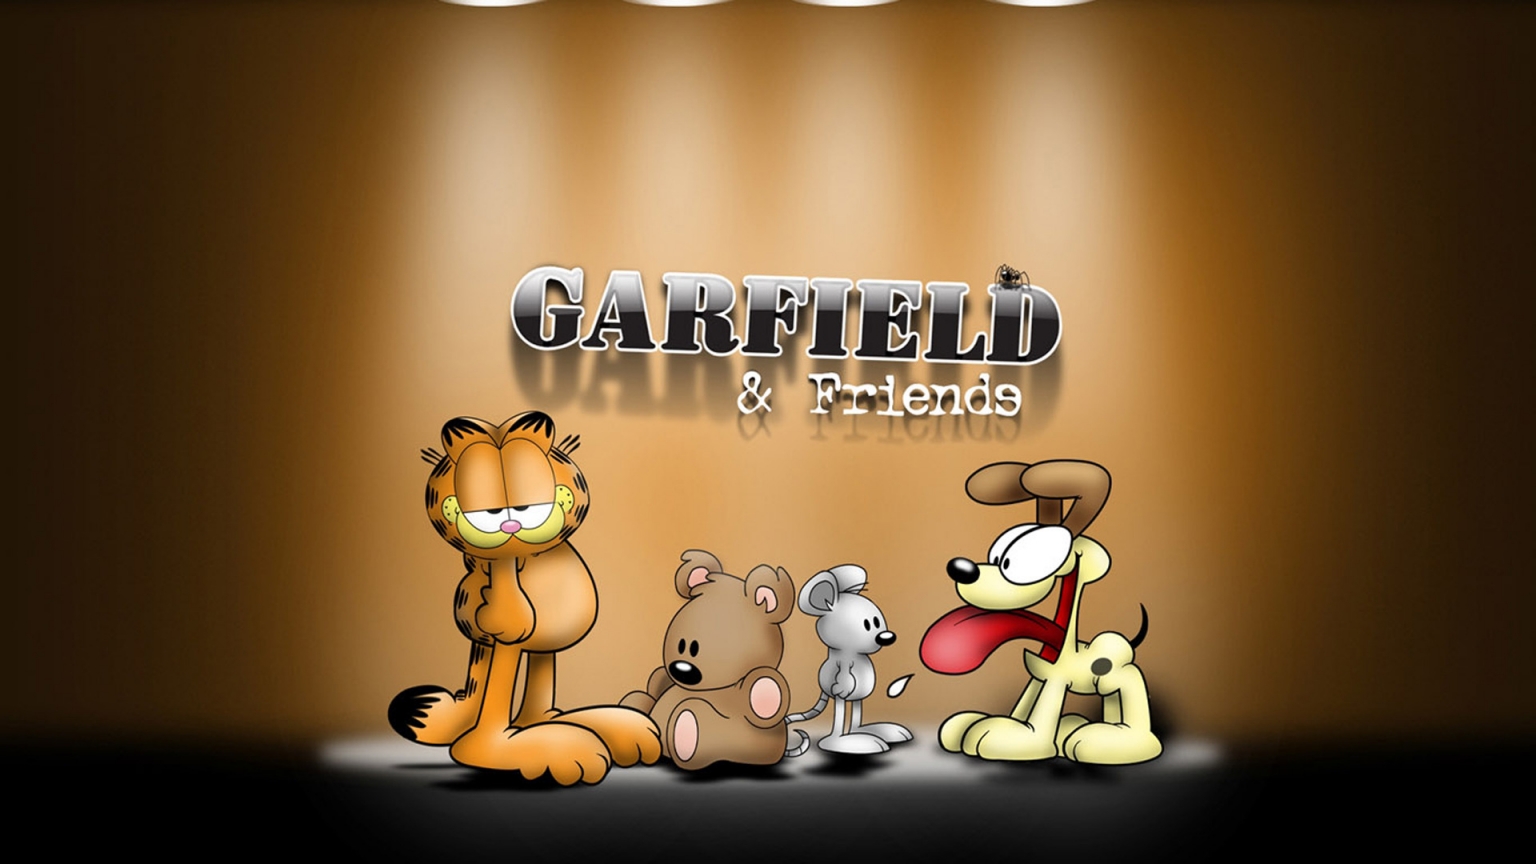 Garfield and Friends for 1536 x 864 HDTV resolution